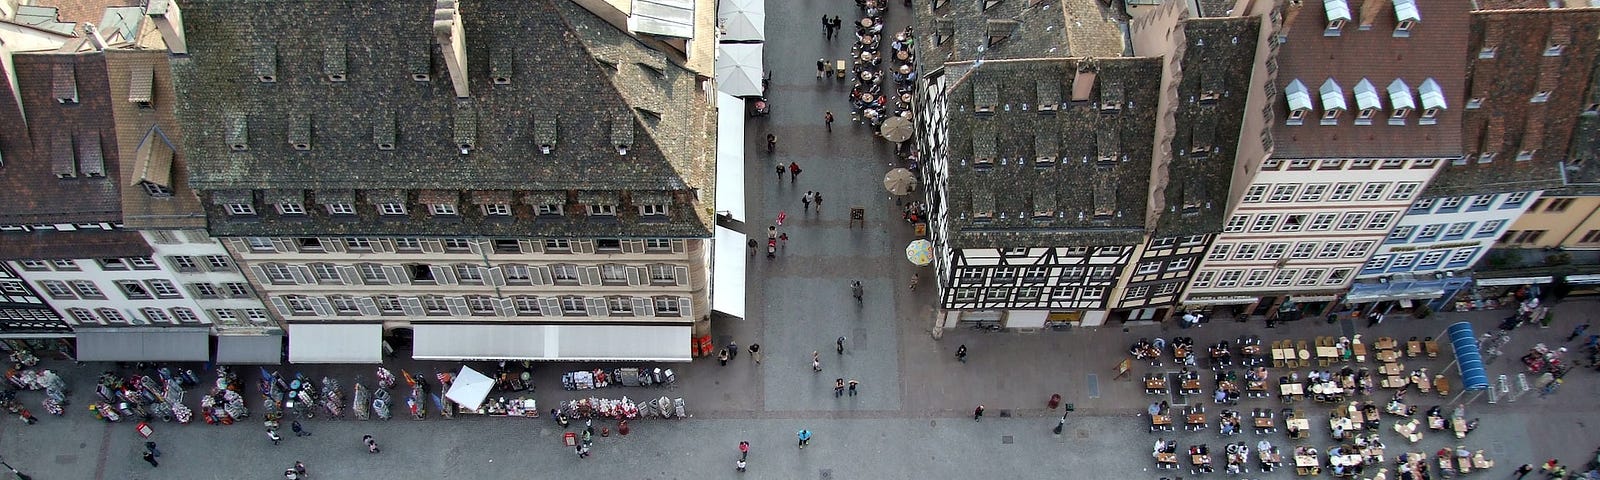 IMAGE: An aerial view of several pedestrianized streets in Strasbourg, France